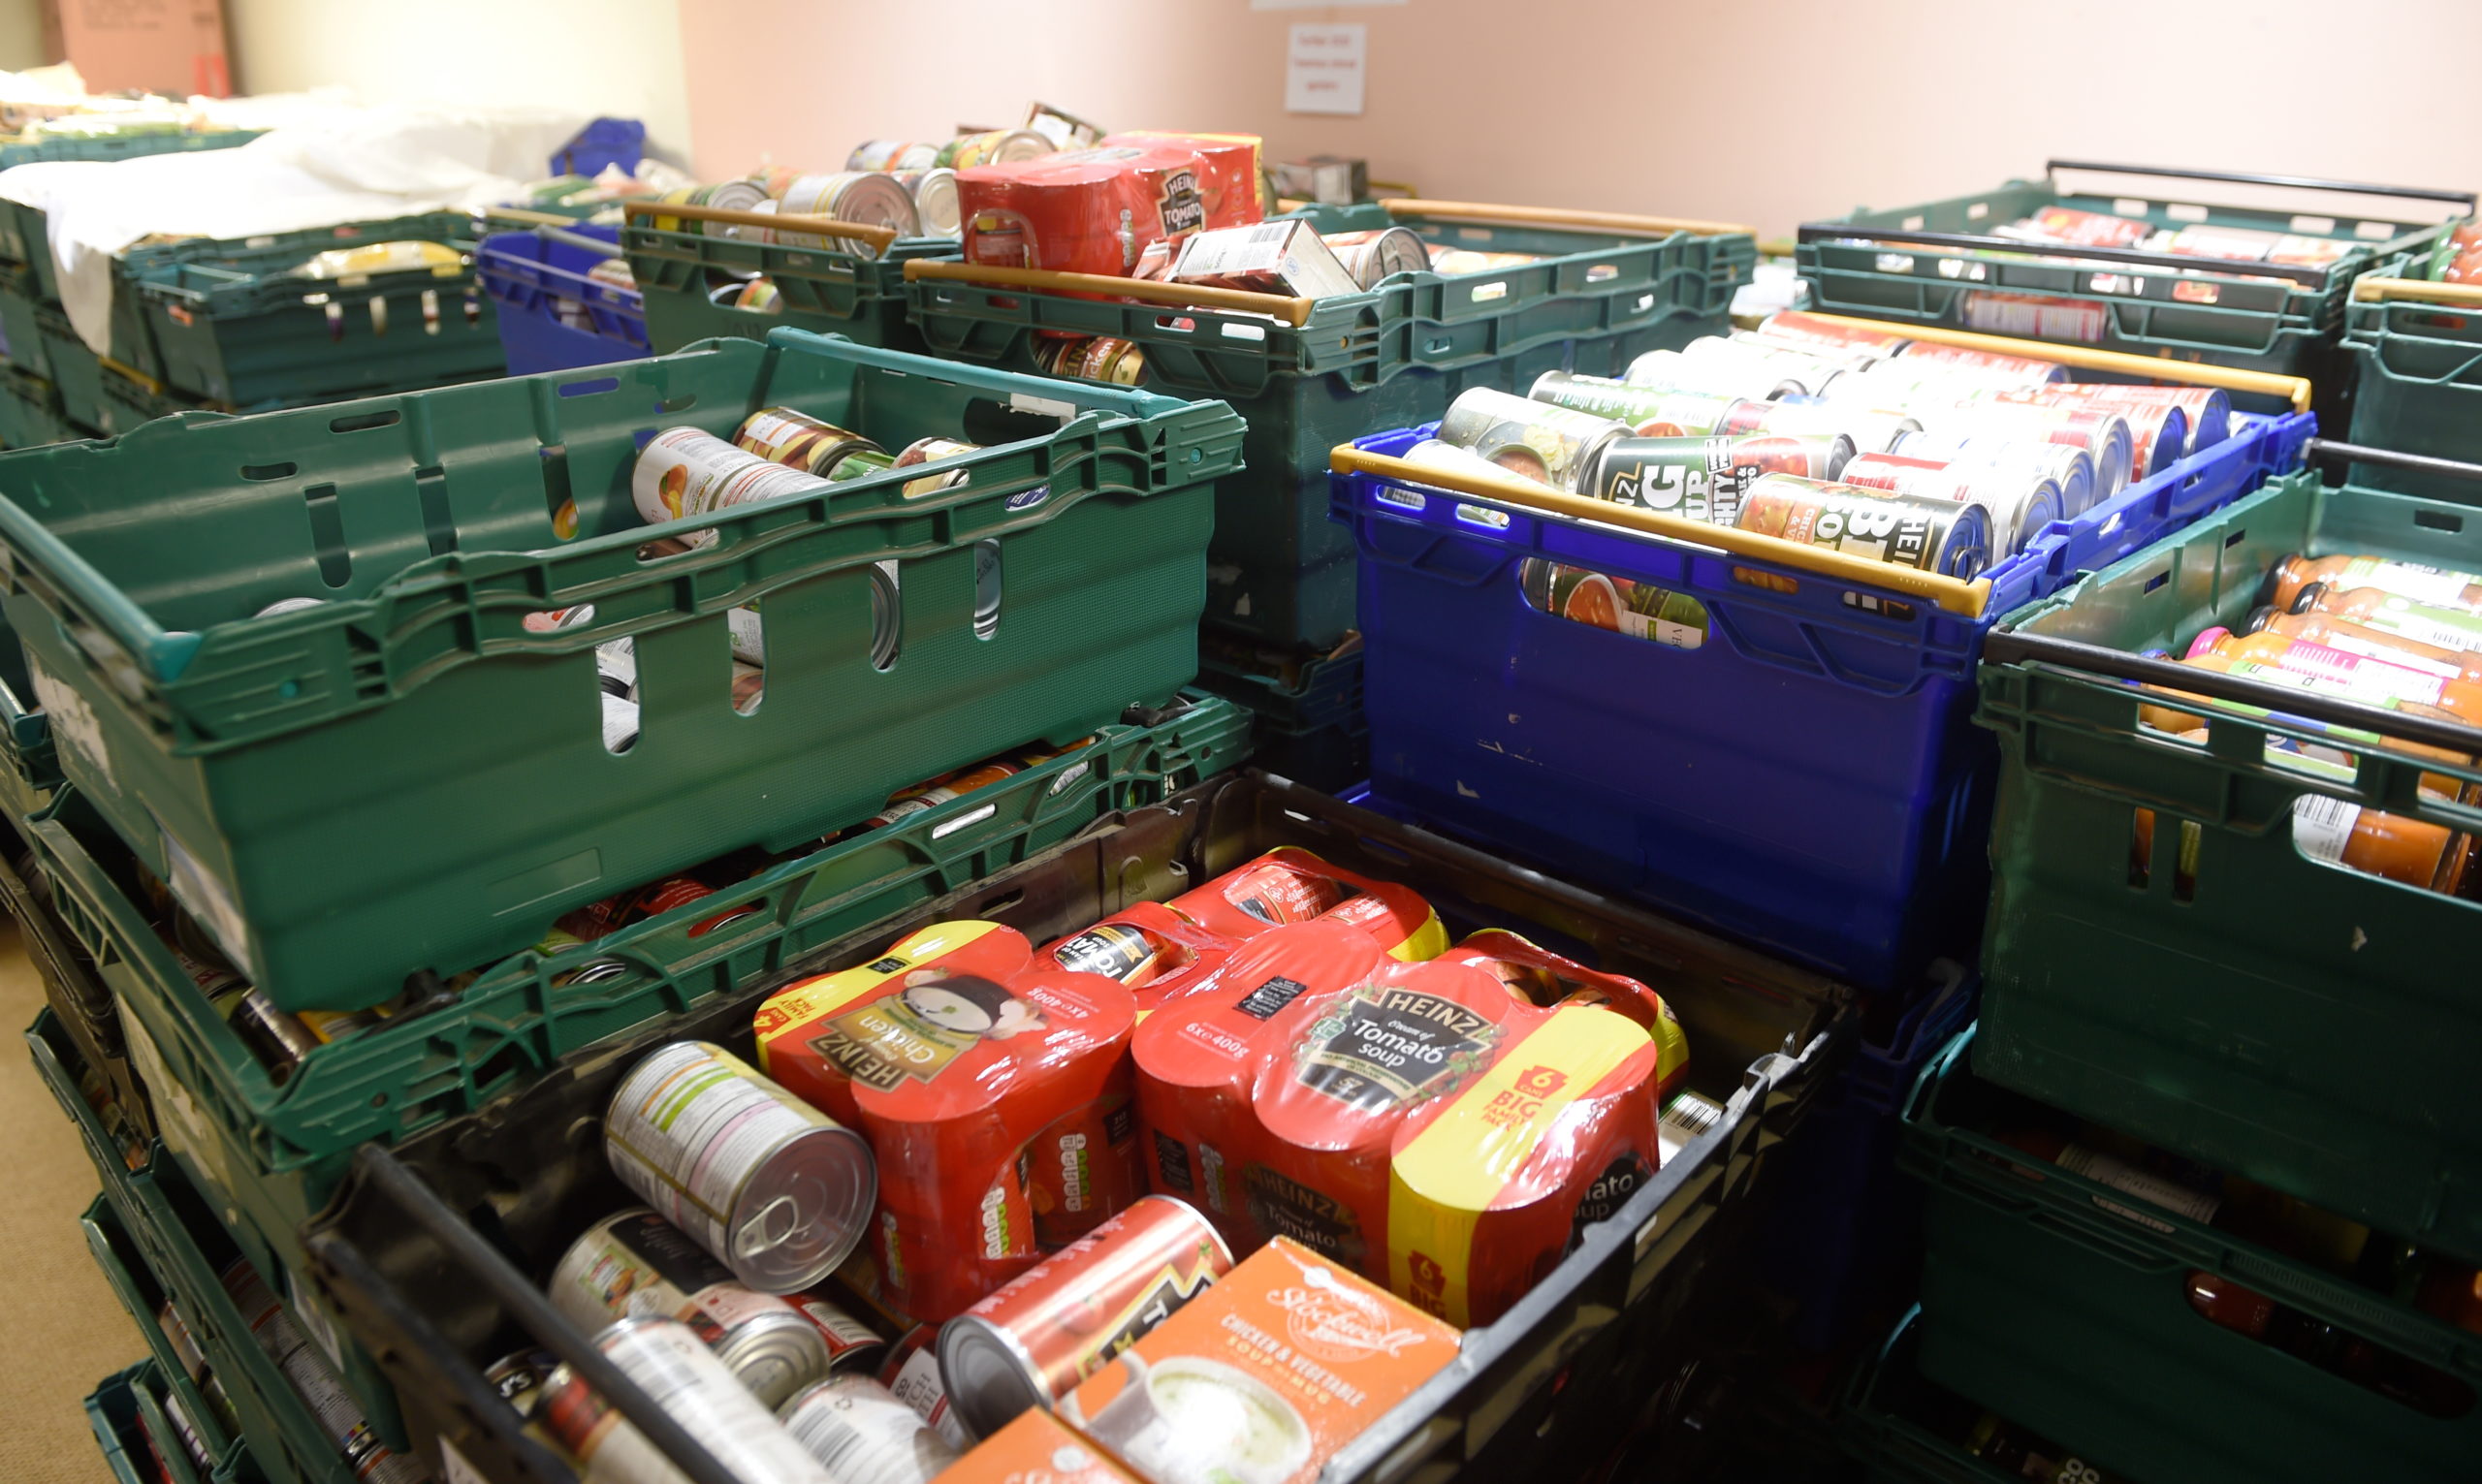 The fund will help groups providing vital supplies including food for families.